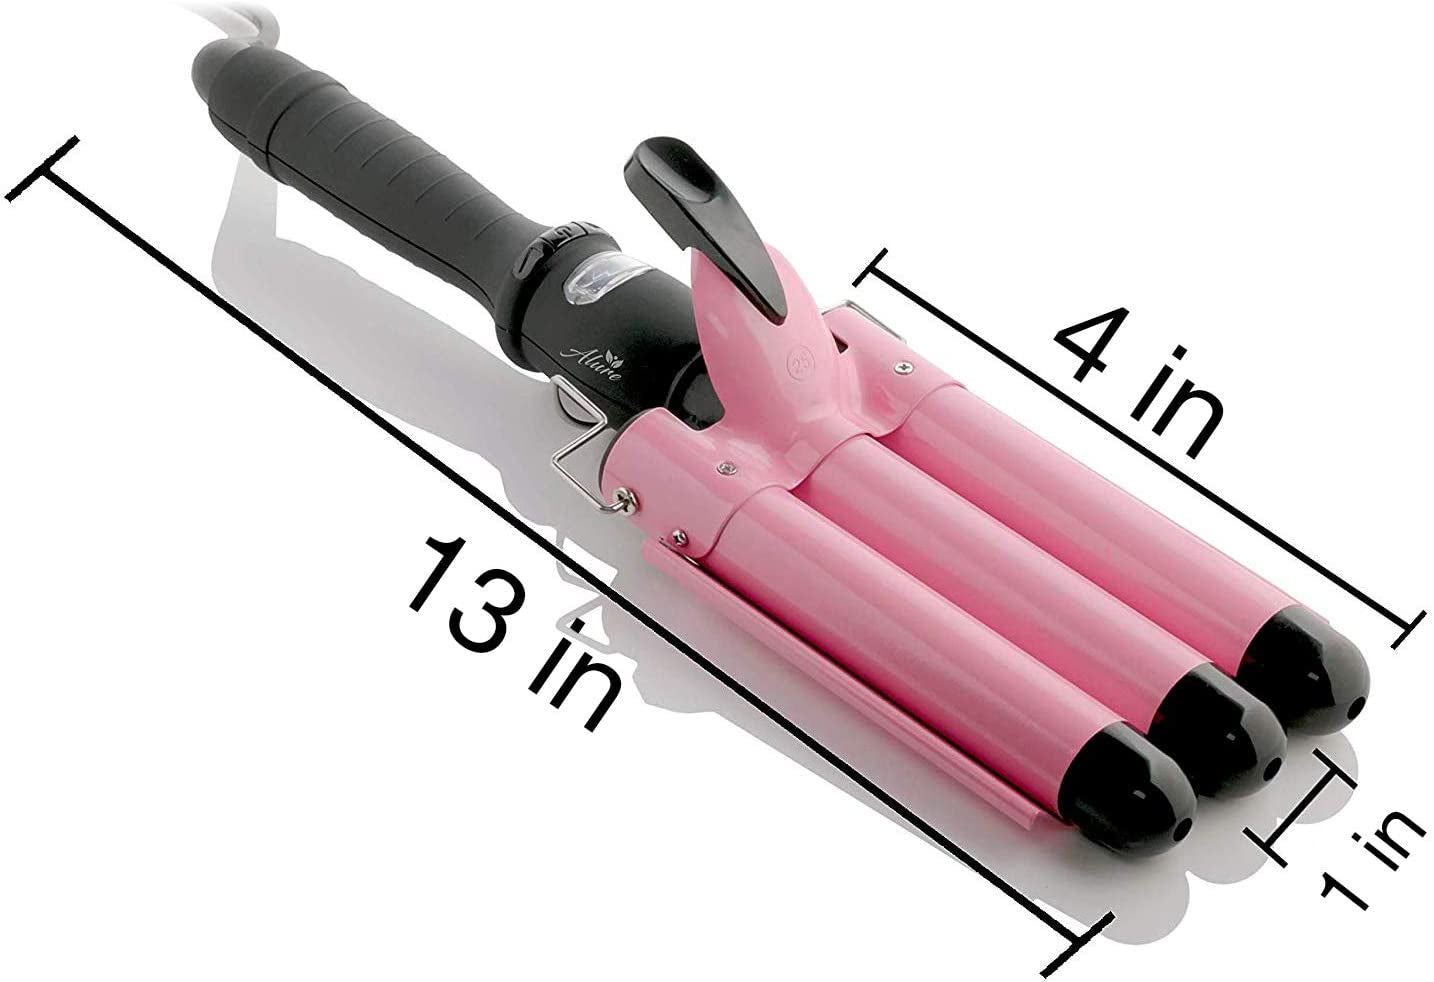 Spring Three Barrel Curling Iron Wand with LCD Temperature Display